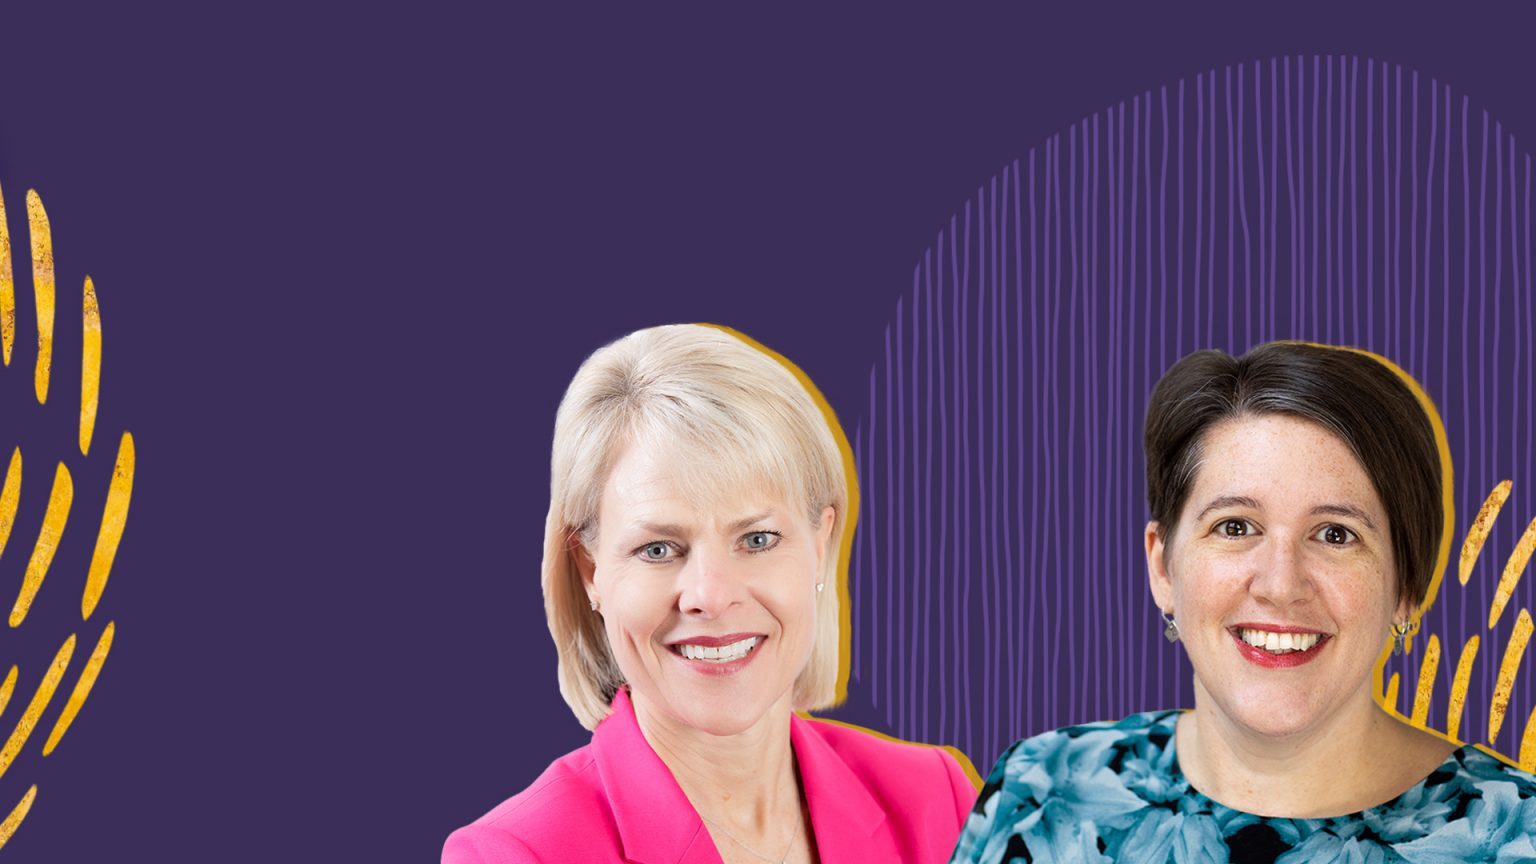 Two women against a purple background